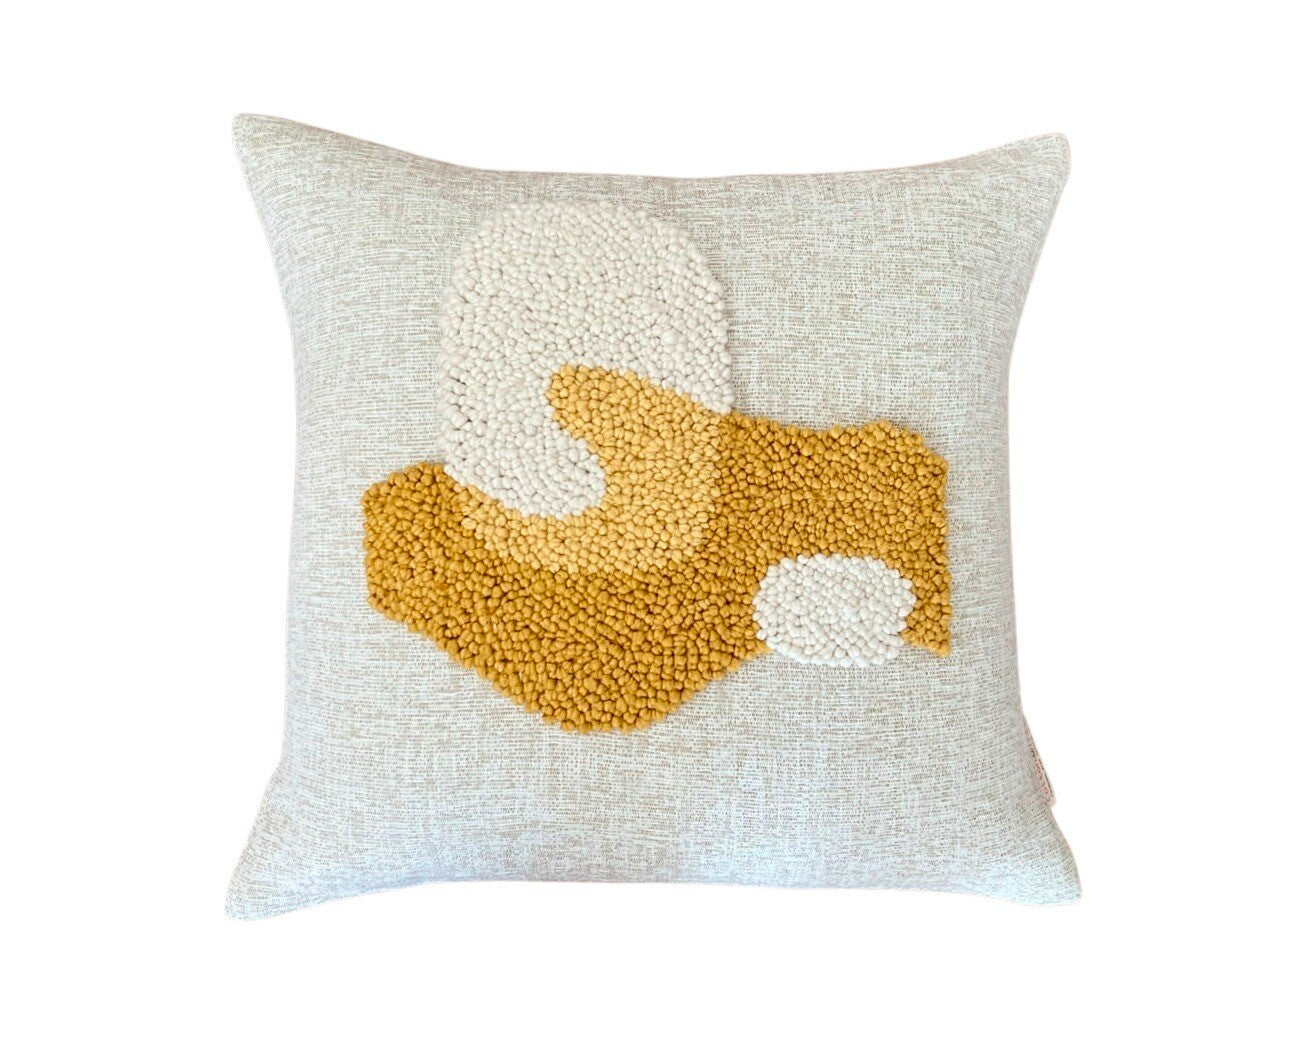 Scatter_Cushion_Punchneedle_Natural_Mustard_Yellow